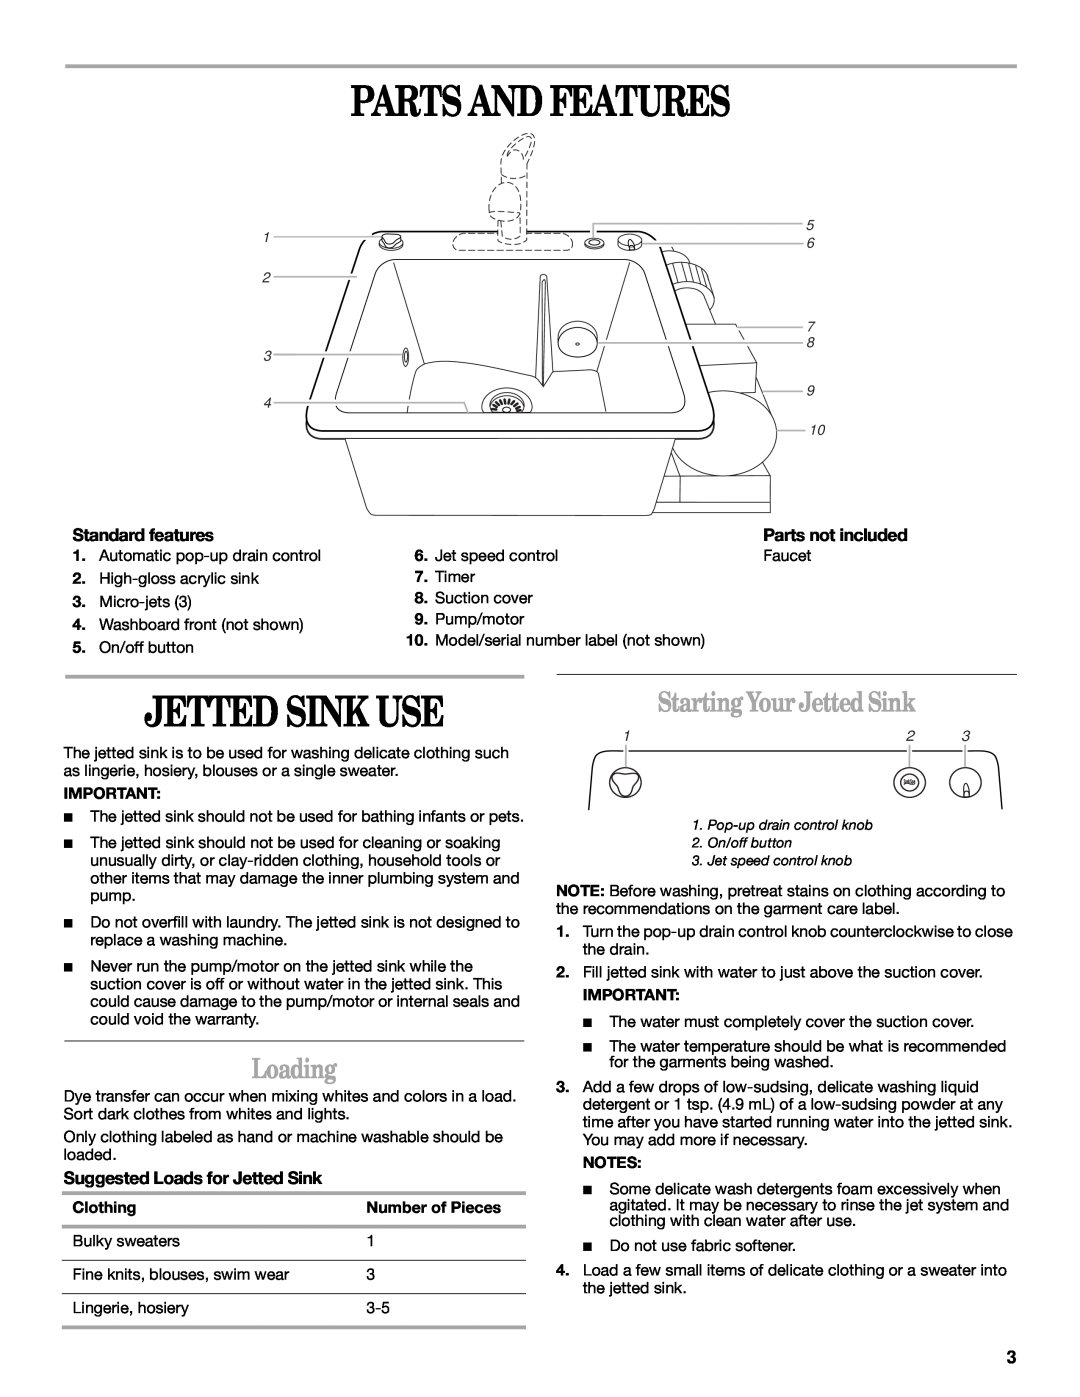 Whirlpool JETTED SINK manual Parts And Features, Jetted Sink Use, Loading, Starting Your Jetted Sink, Standard features 